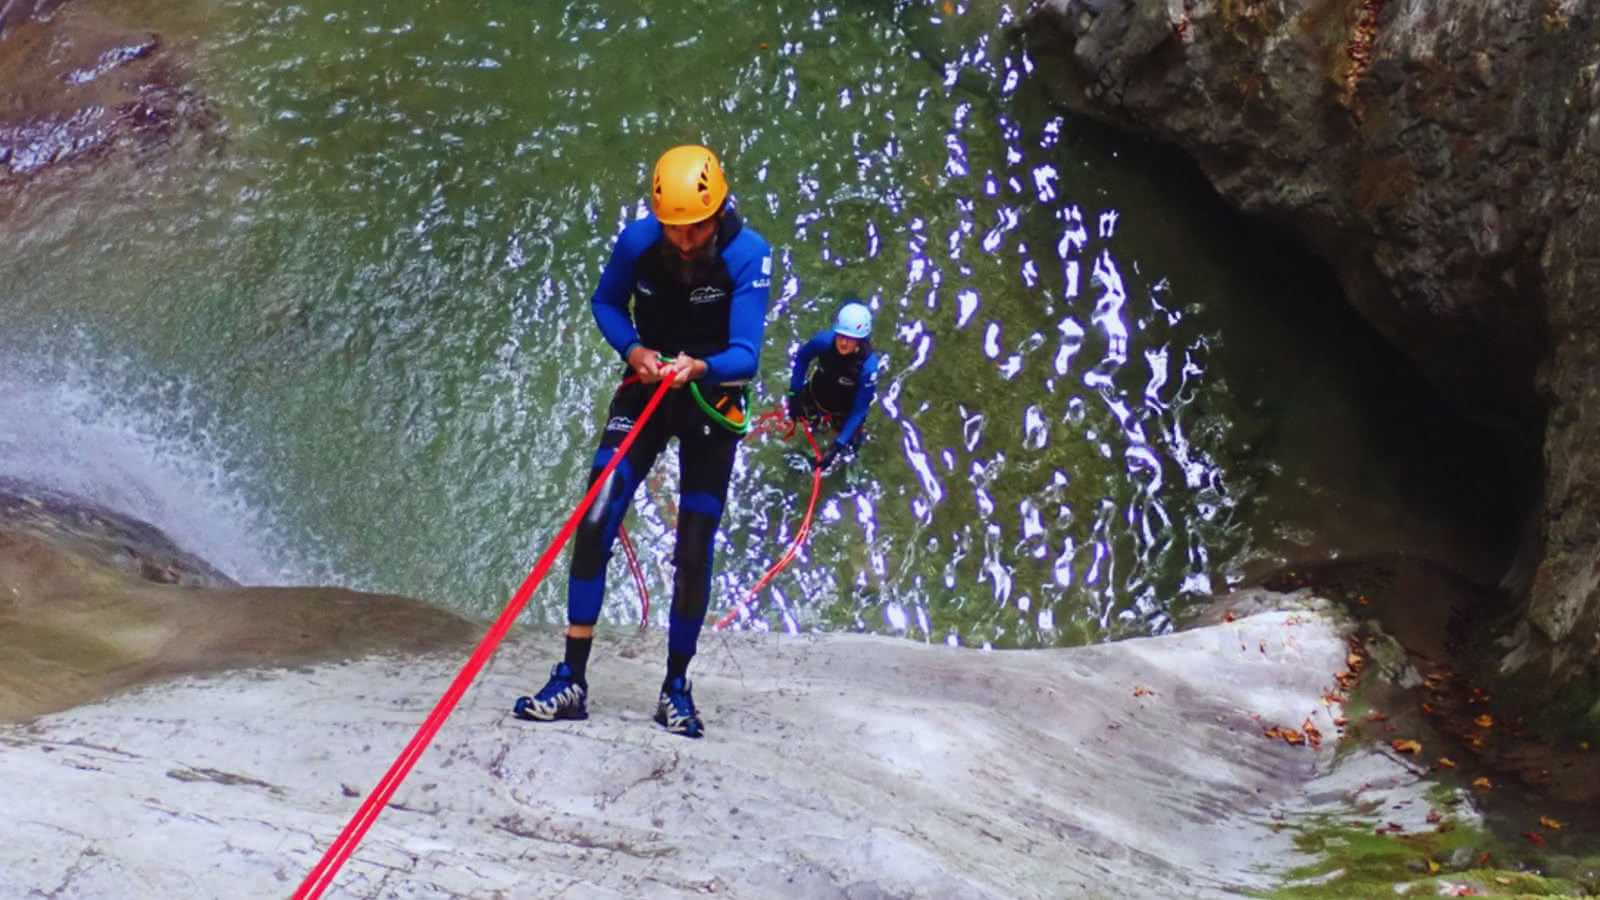 rappel canyoning